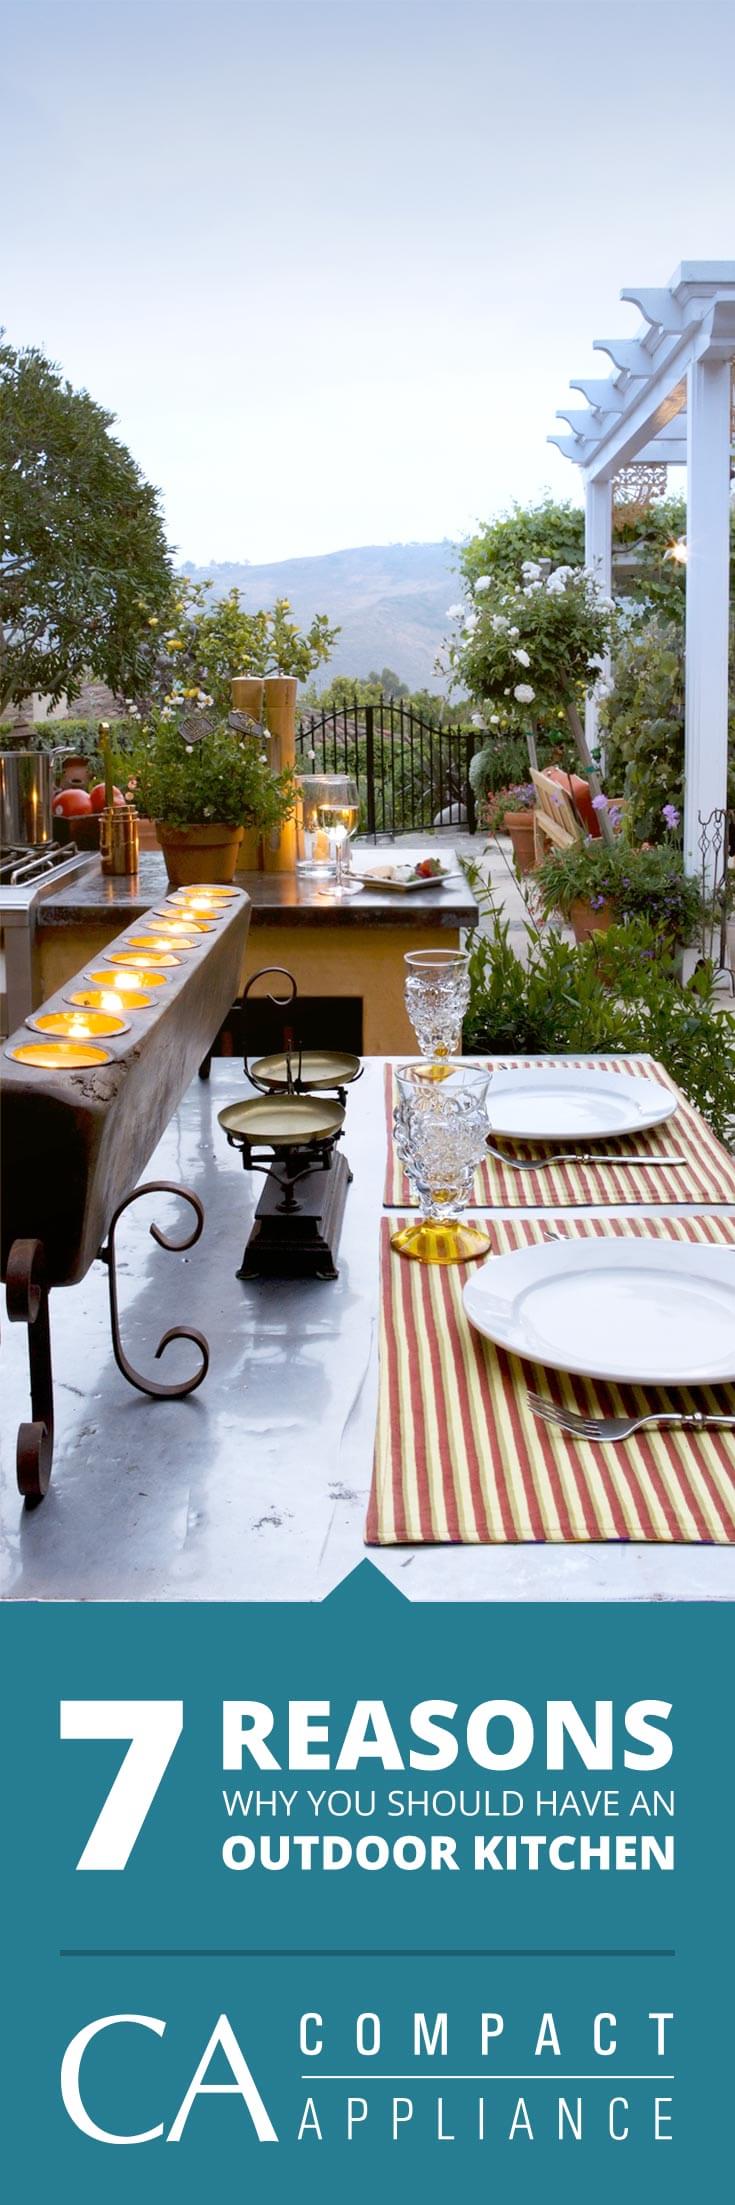 7 Reasons Why You Should Have an Outdoor Kitchen